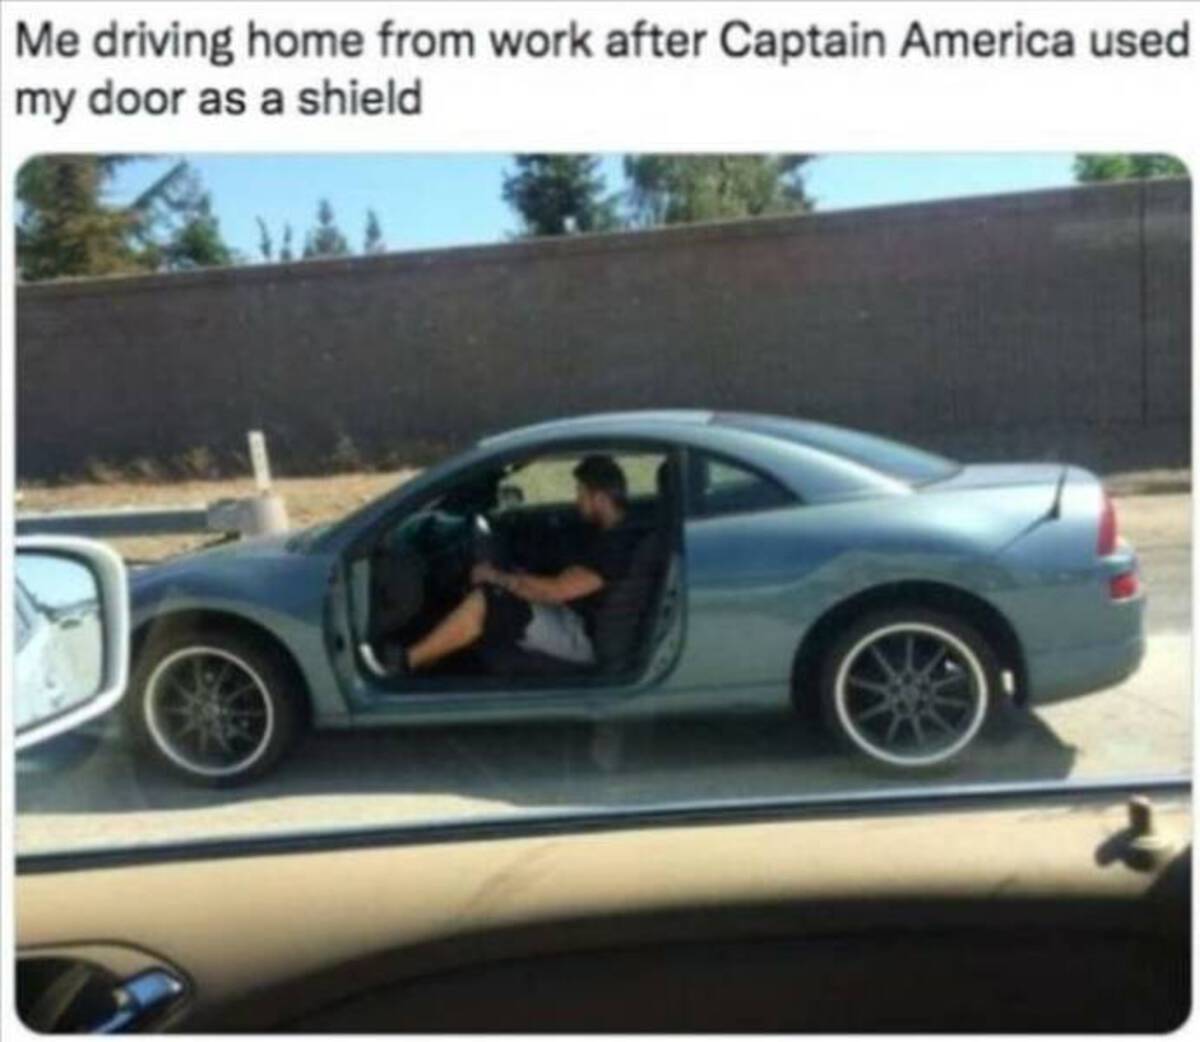 feel like if the avengers were real - Me driving home from work after Captain America used my door as a shield 2